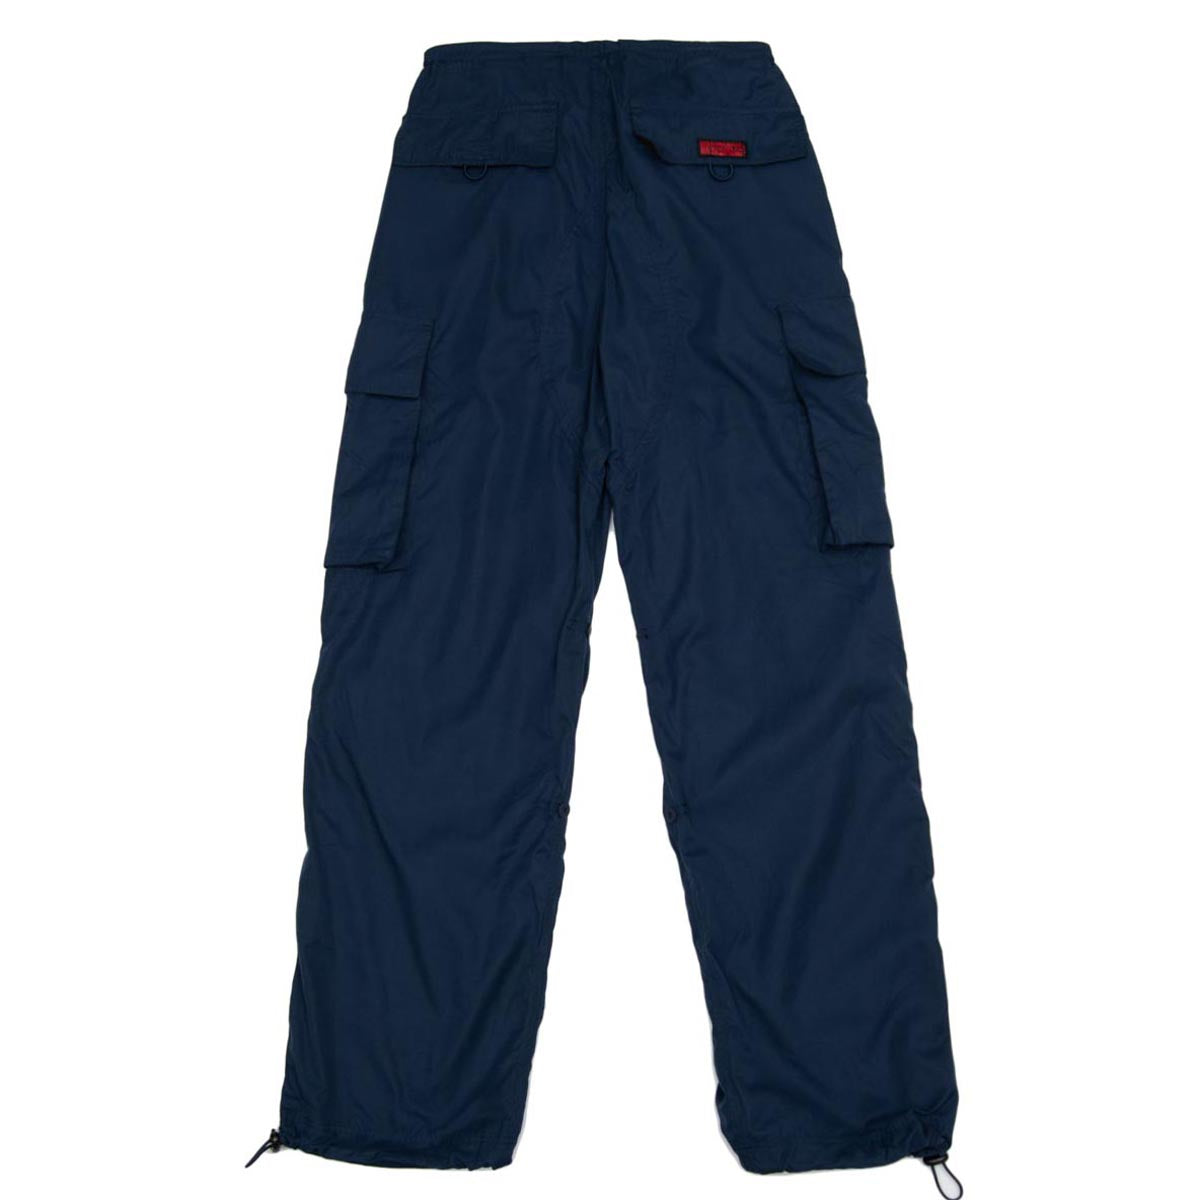 WKND Techie Dirtbags Pants - Navy image 2